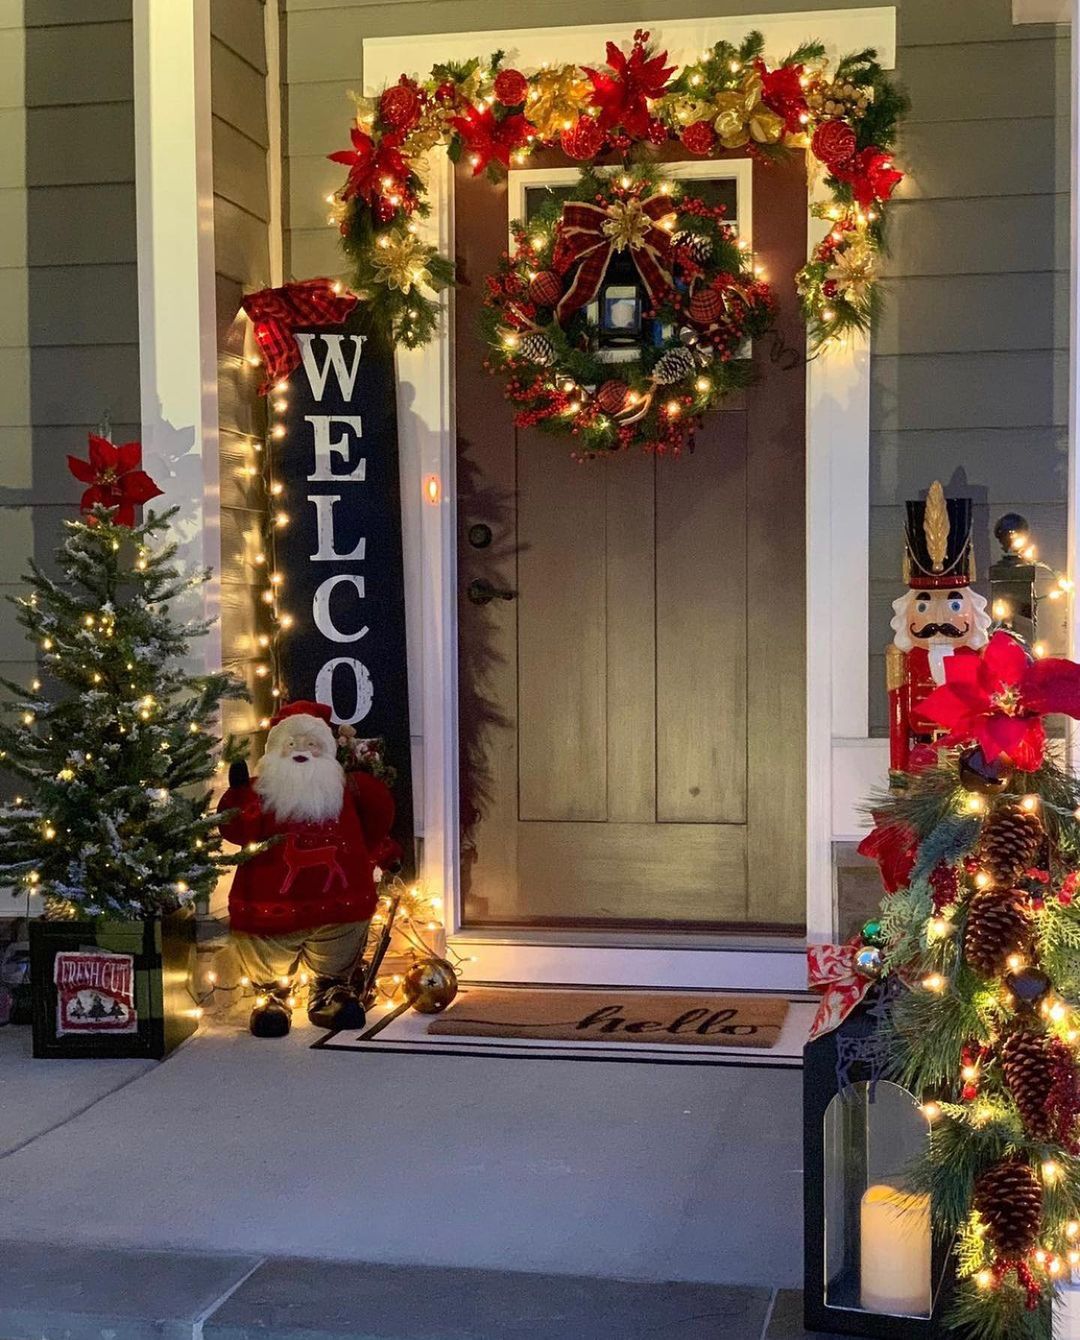 A front porch lights up to reveal a Santa Claus statue on one side of the door, and a nutcracker on the other. Photo by Instagram user @nhomedesignideas.